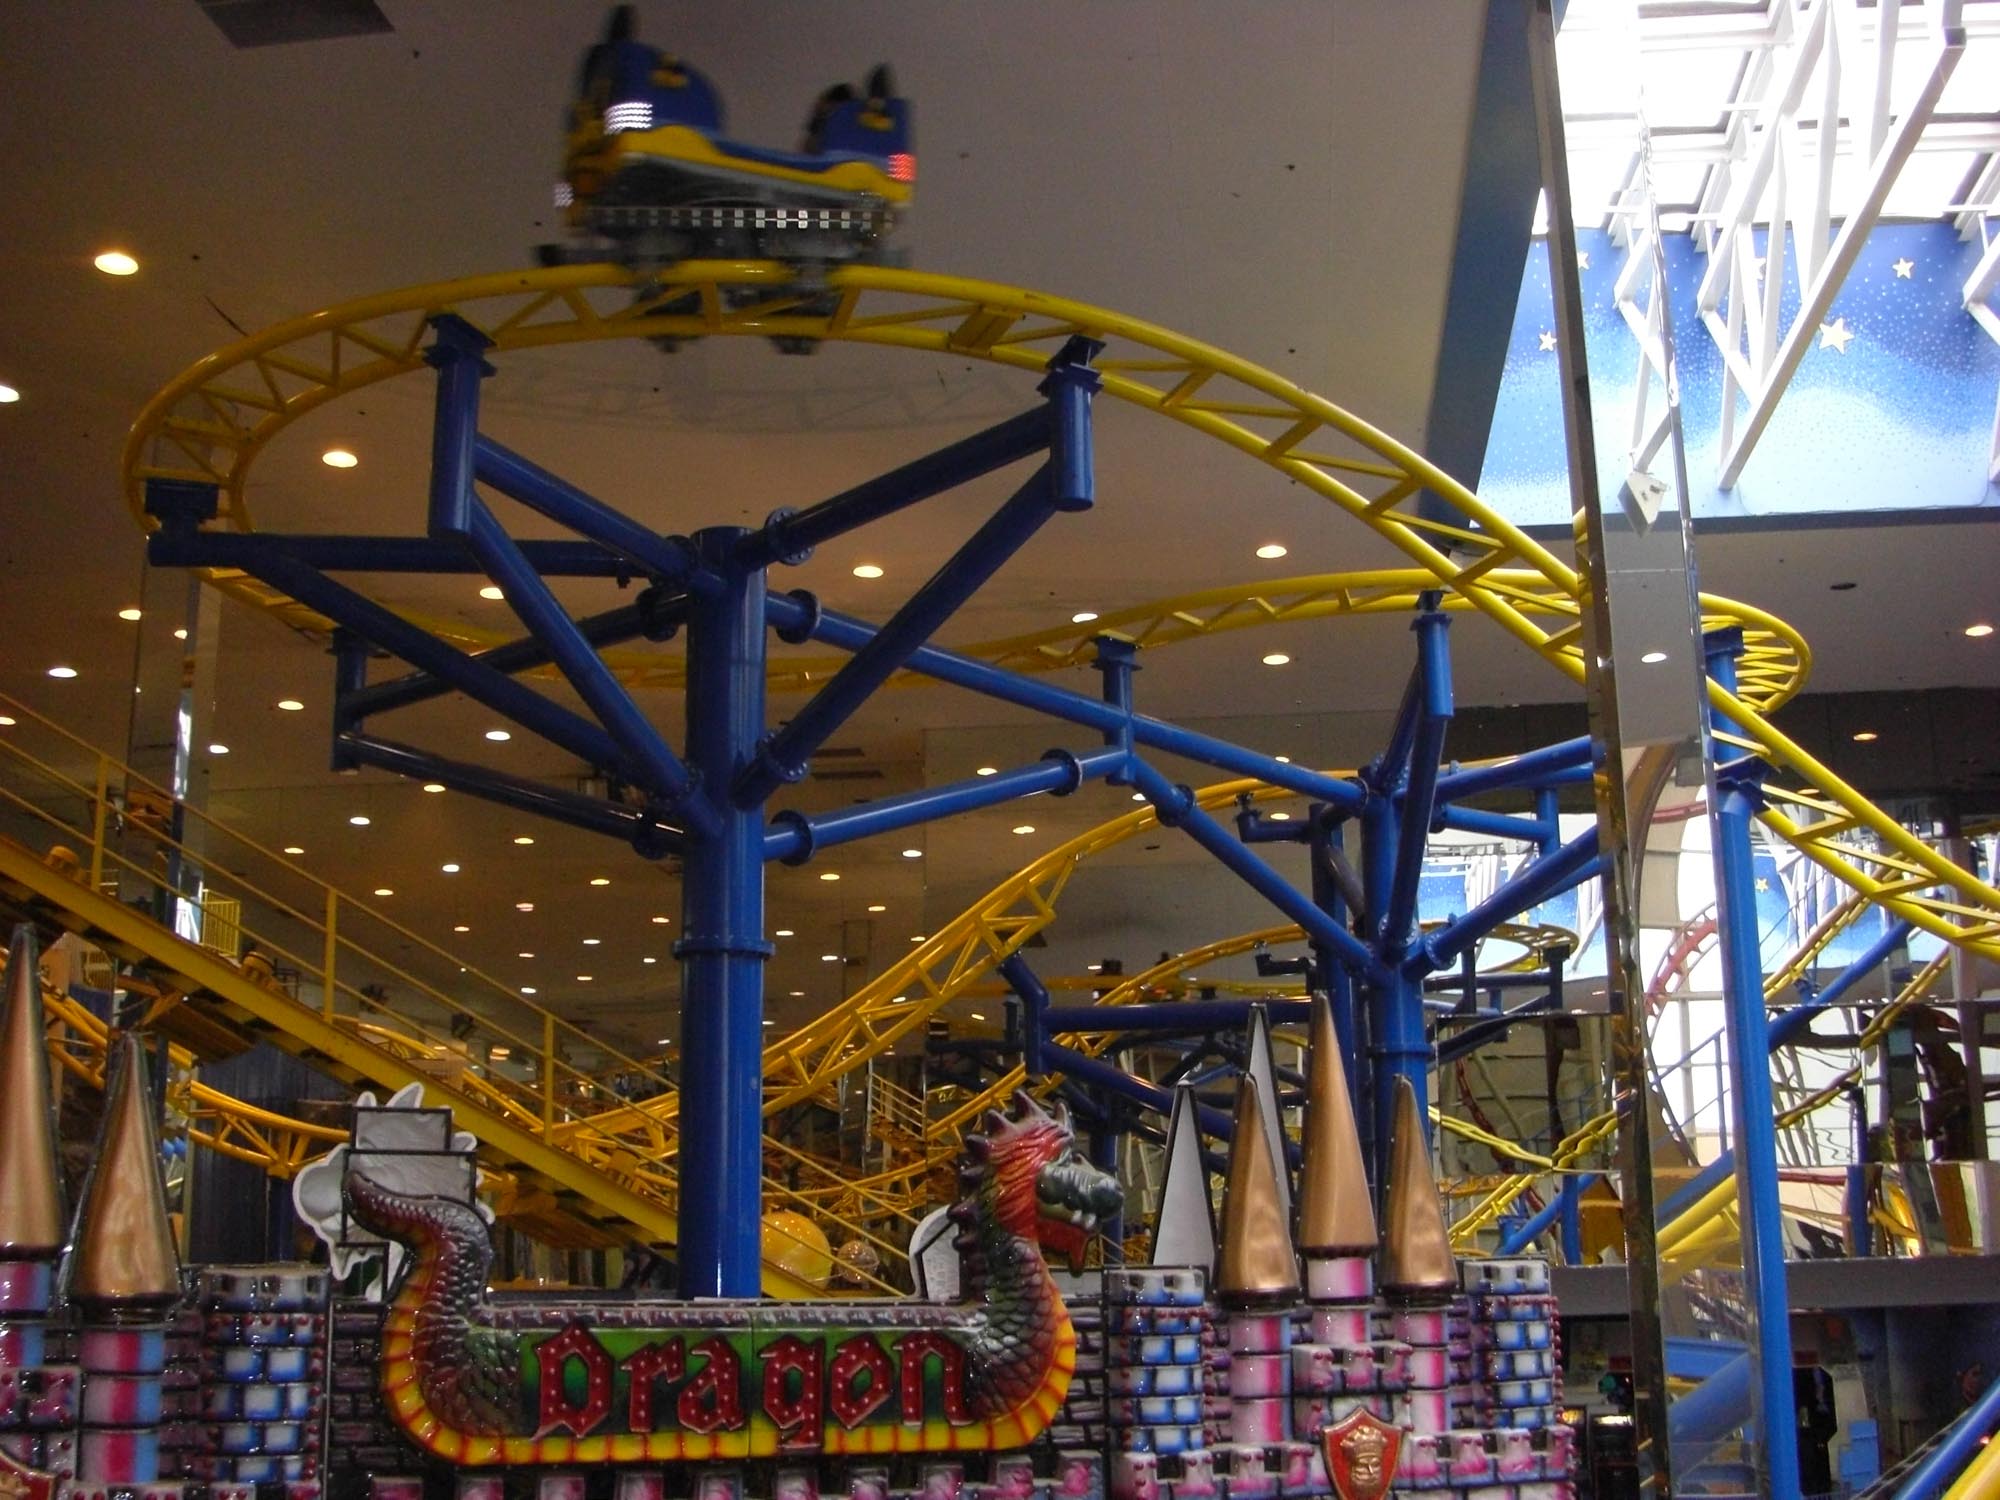 Popular roller-coaster at West Edmonton Mall amusement park to be